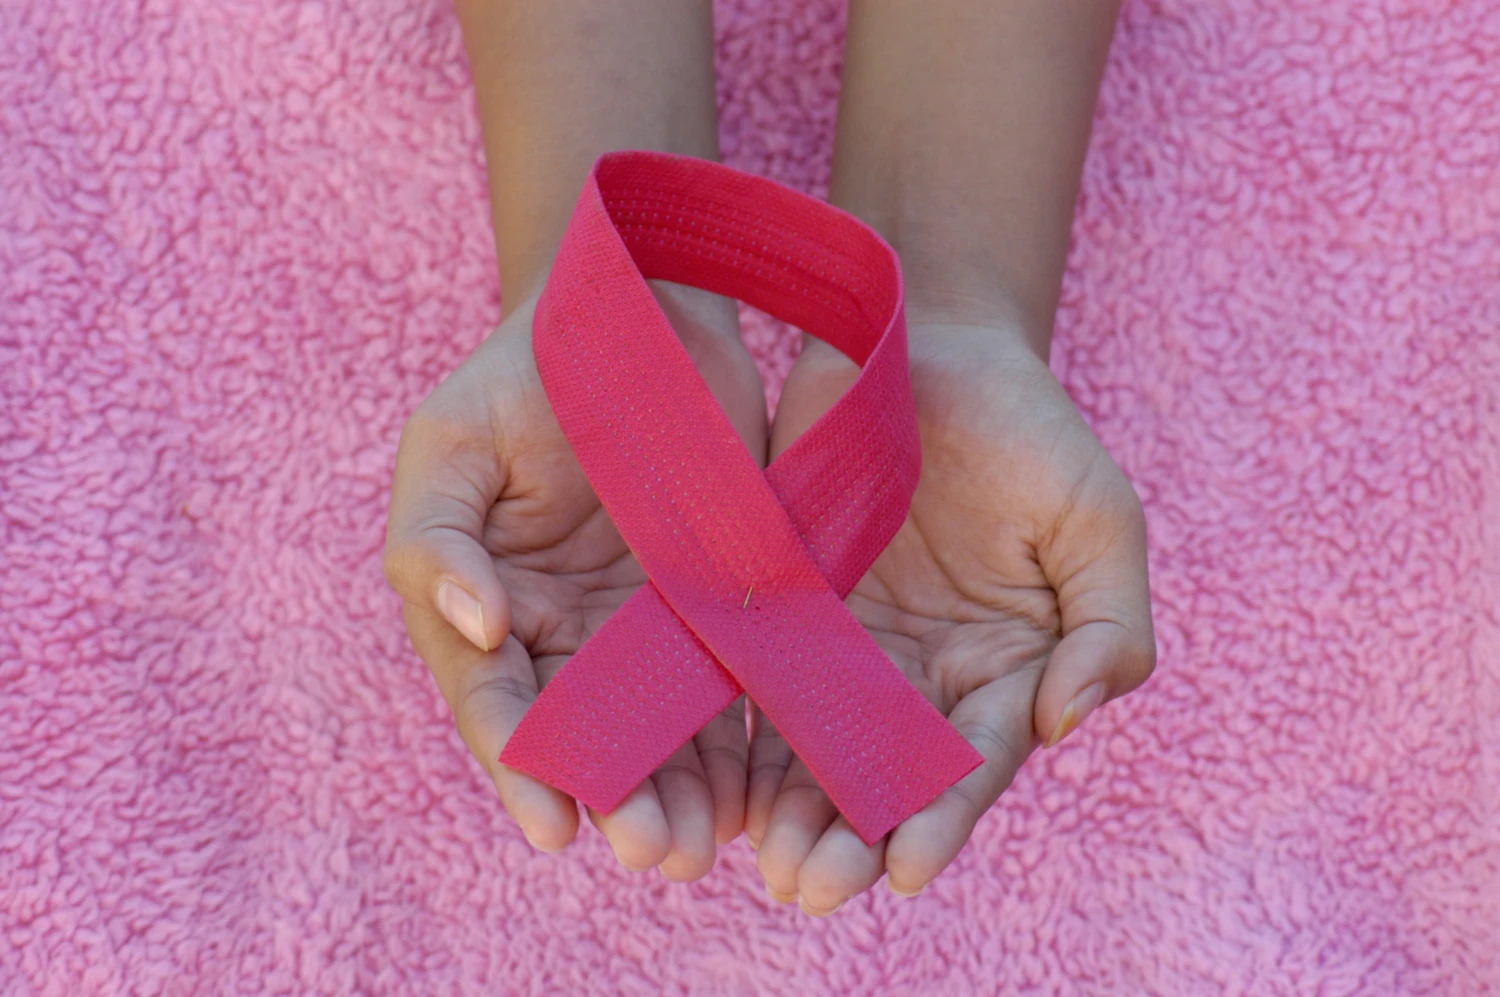 New Study Paves Way for Innovative Breast Cancer Treatments